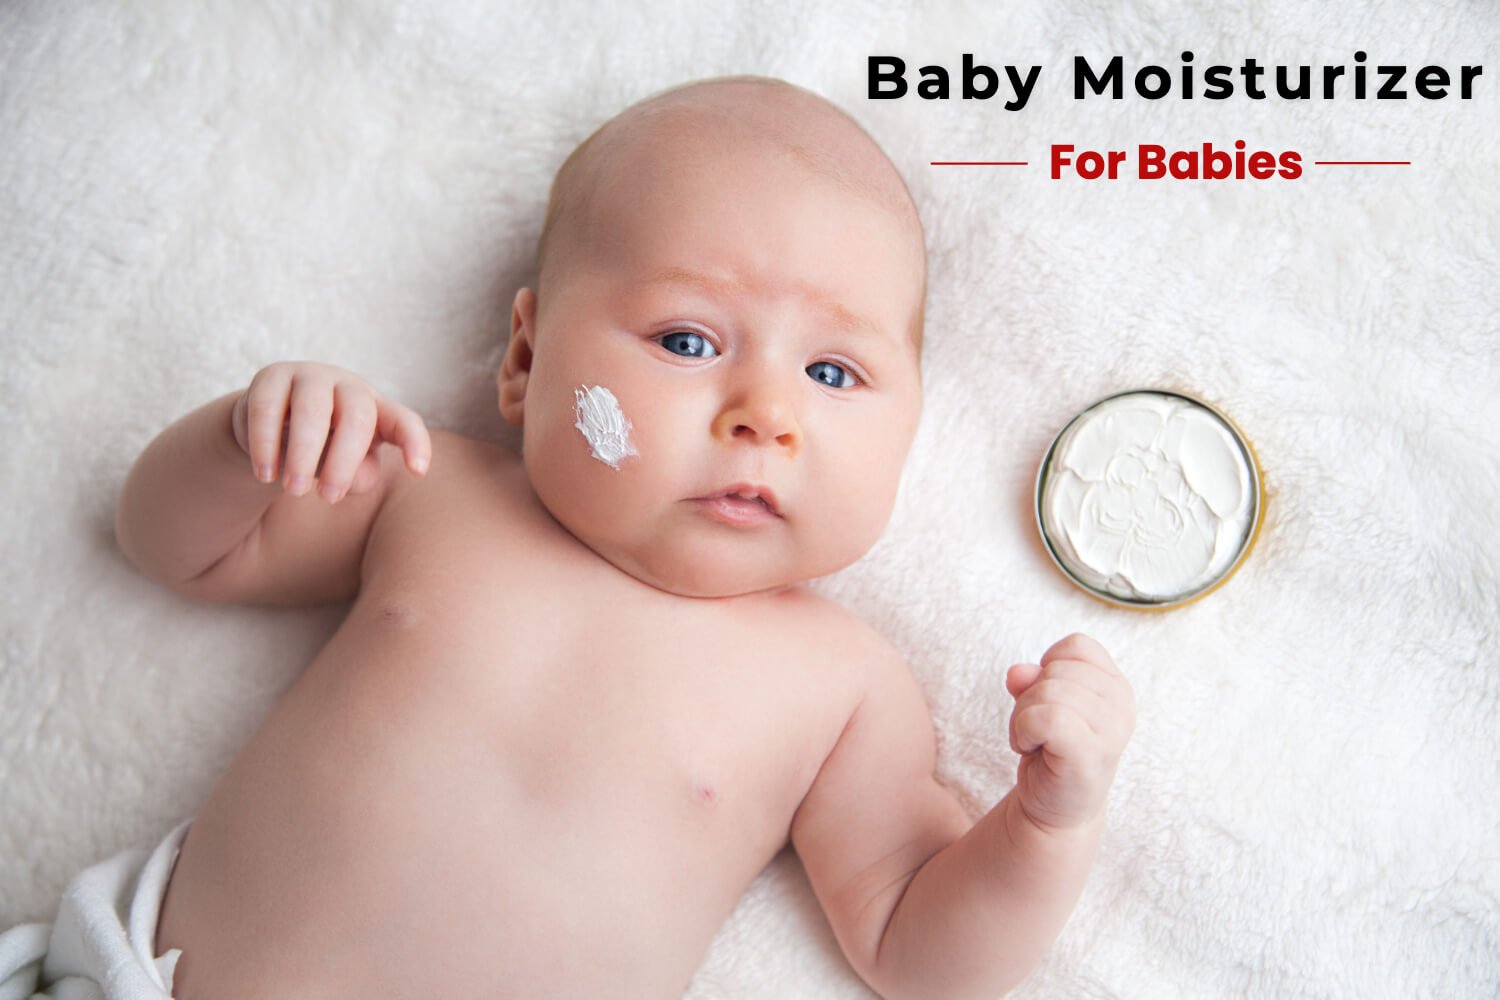 Baby Moisturizer For Your Baby